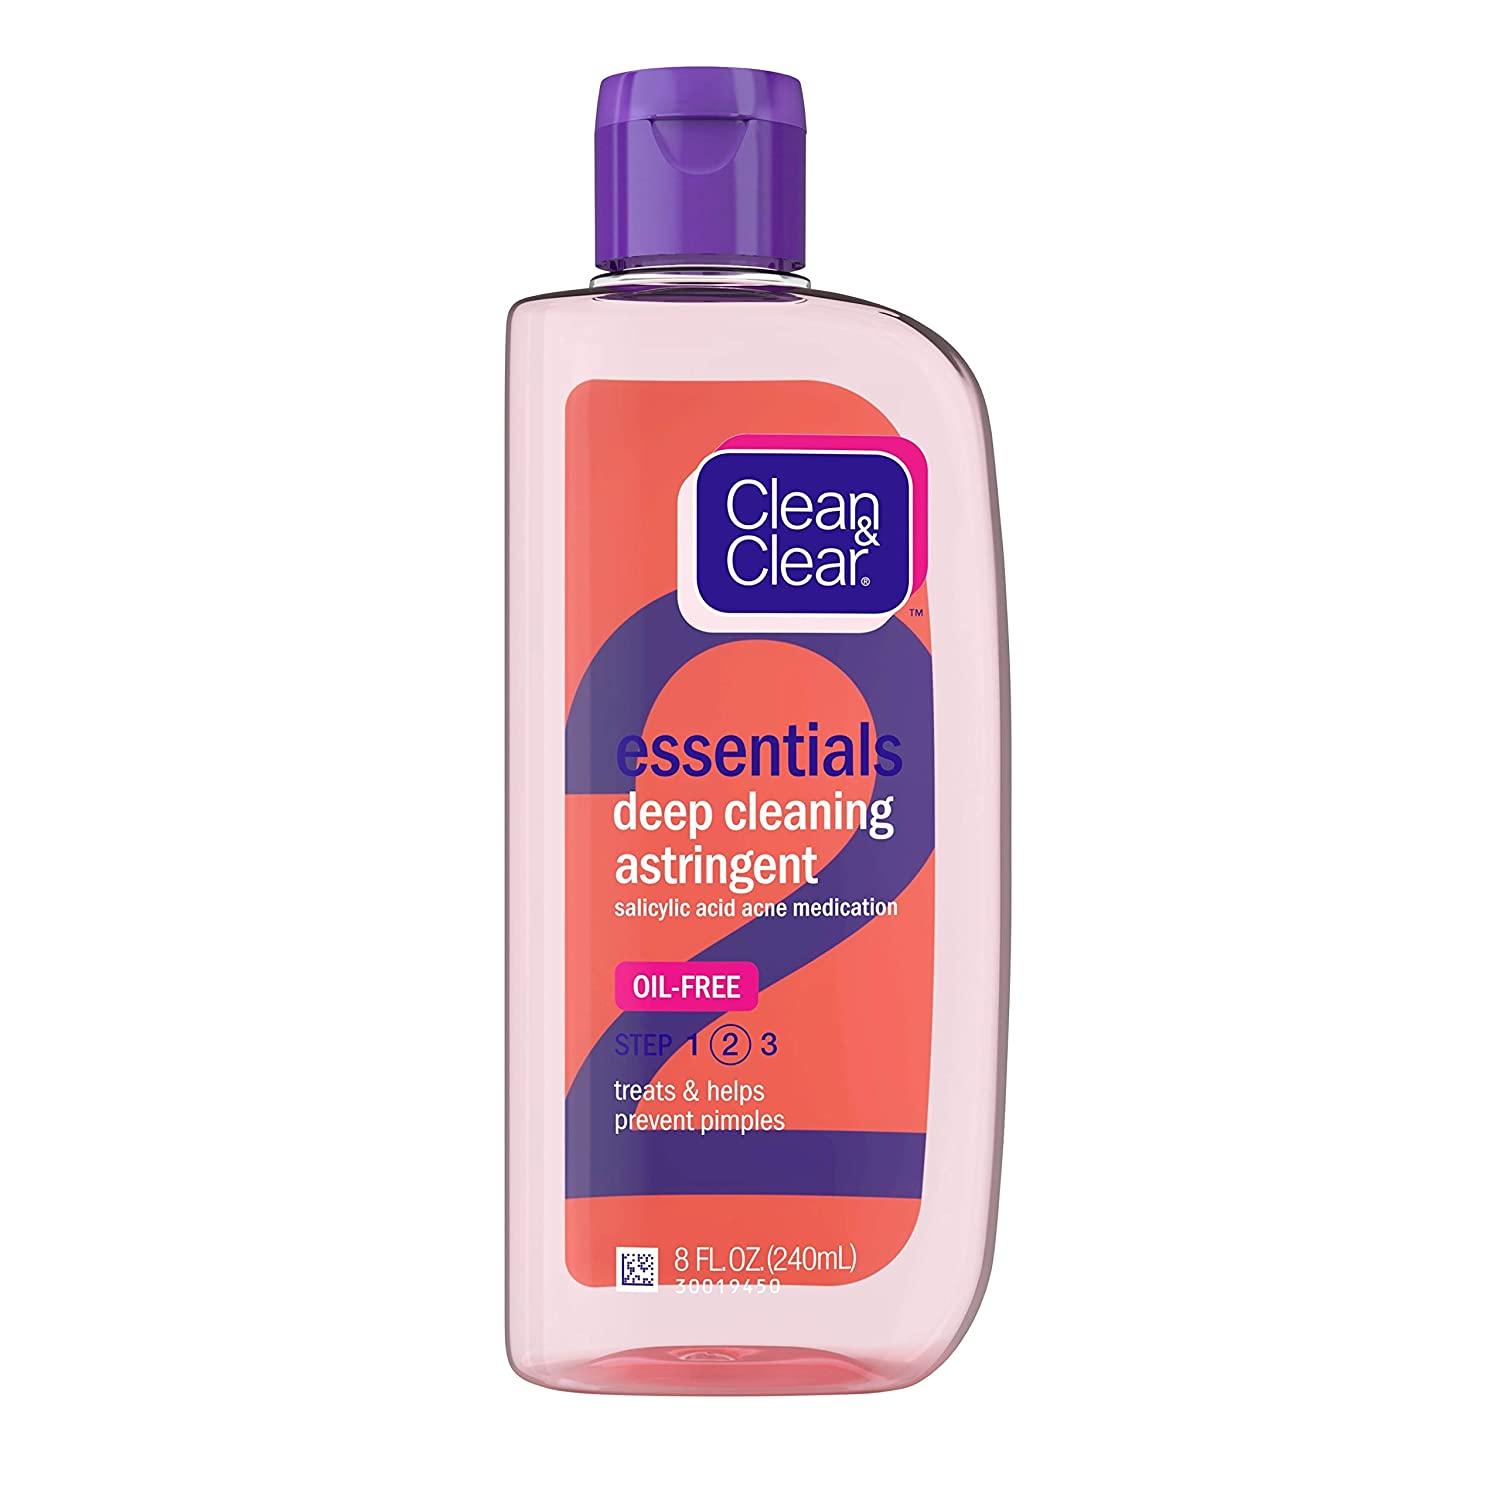 Clean and Clear Essentials Deep Cleaning Astringent for $2.80 Shipped